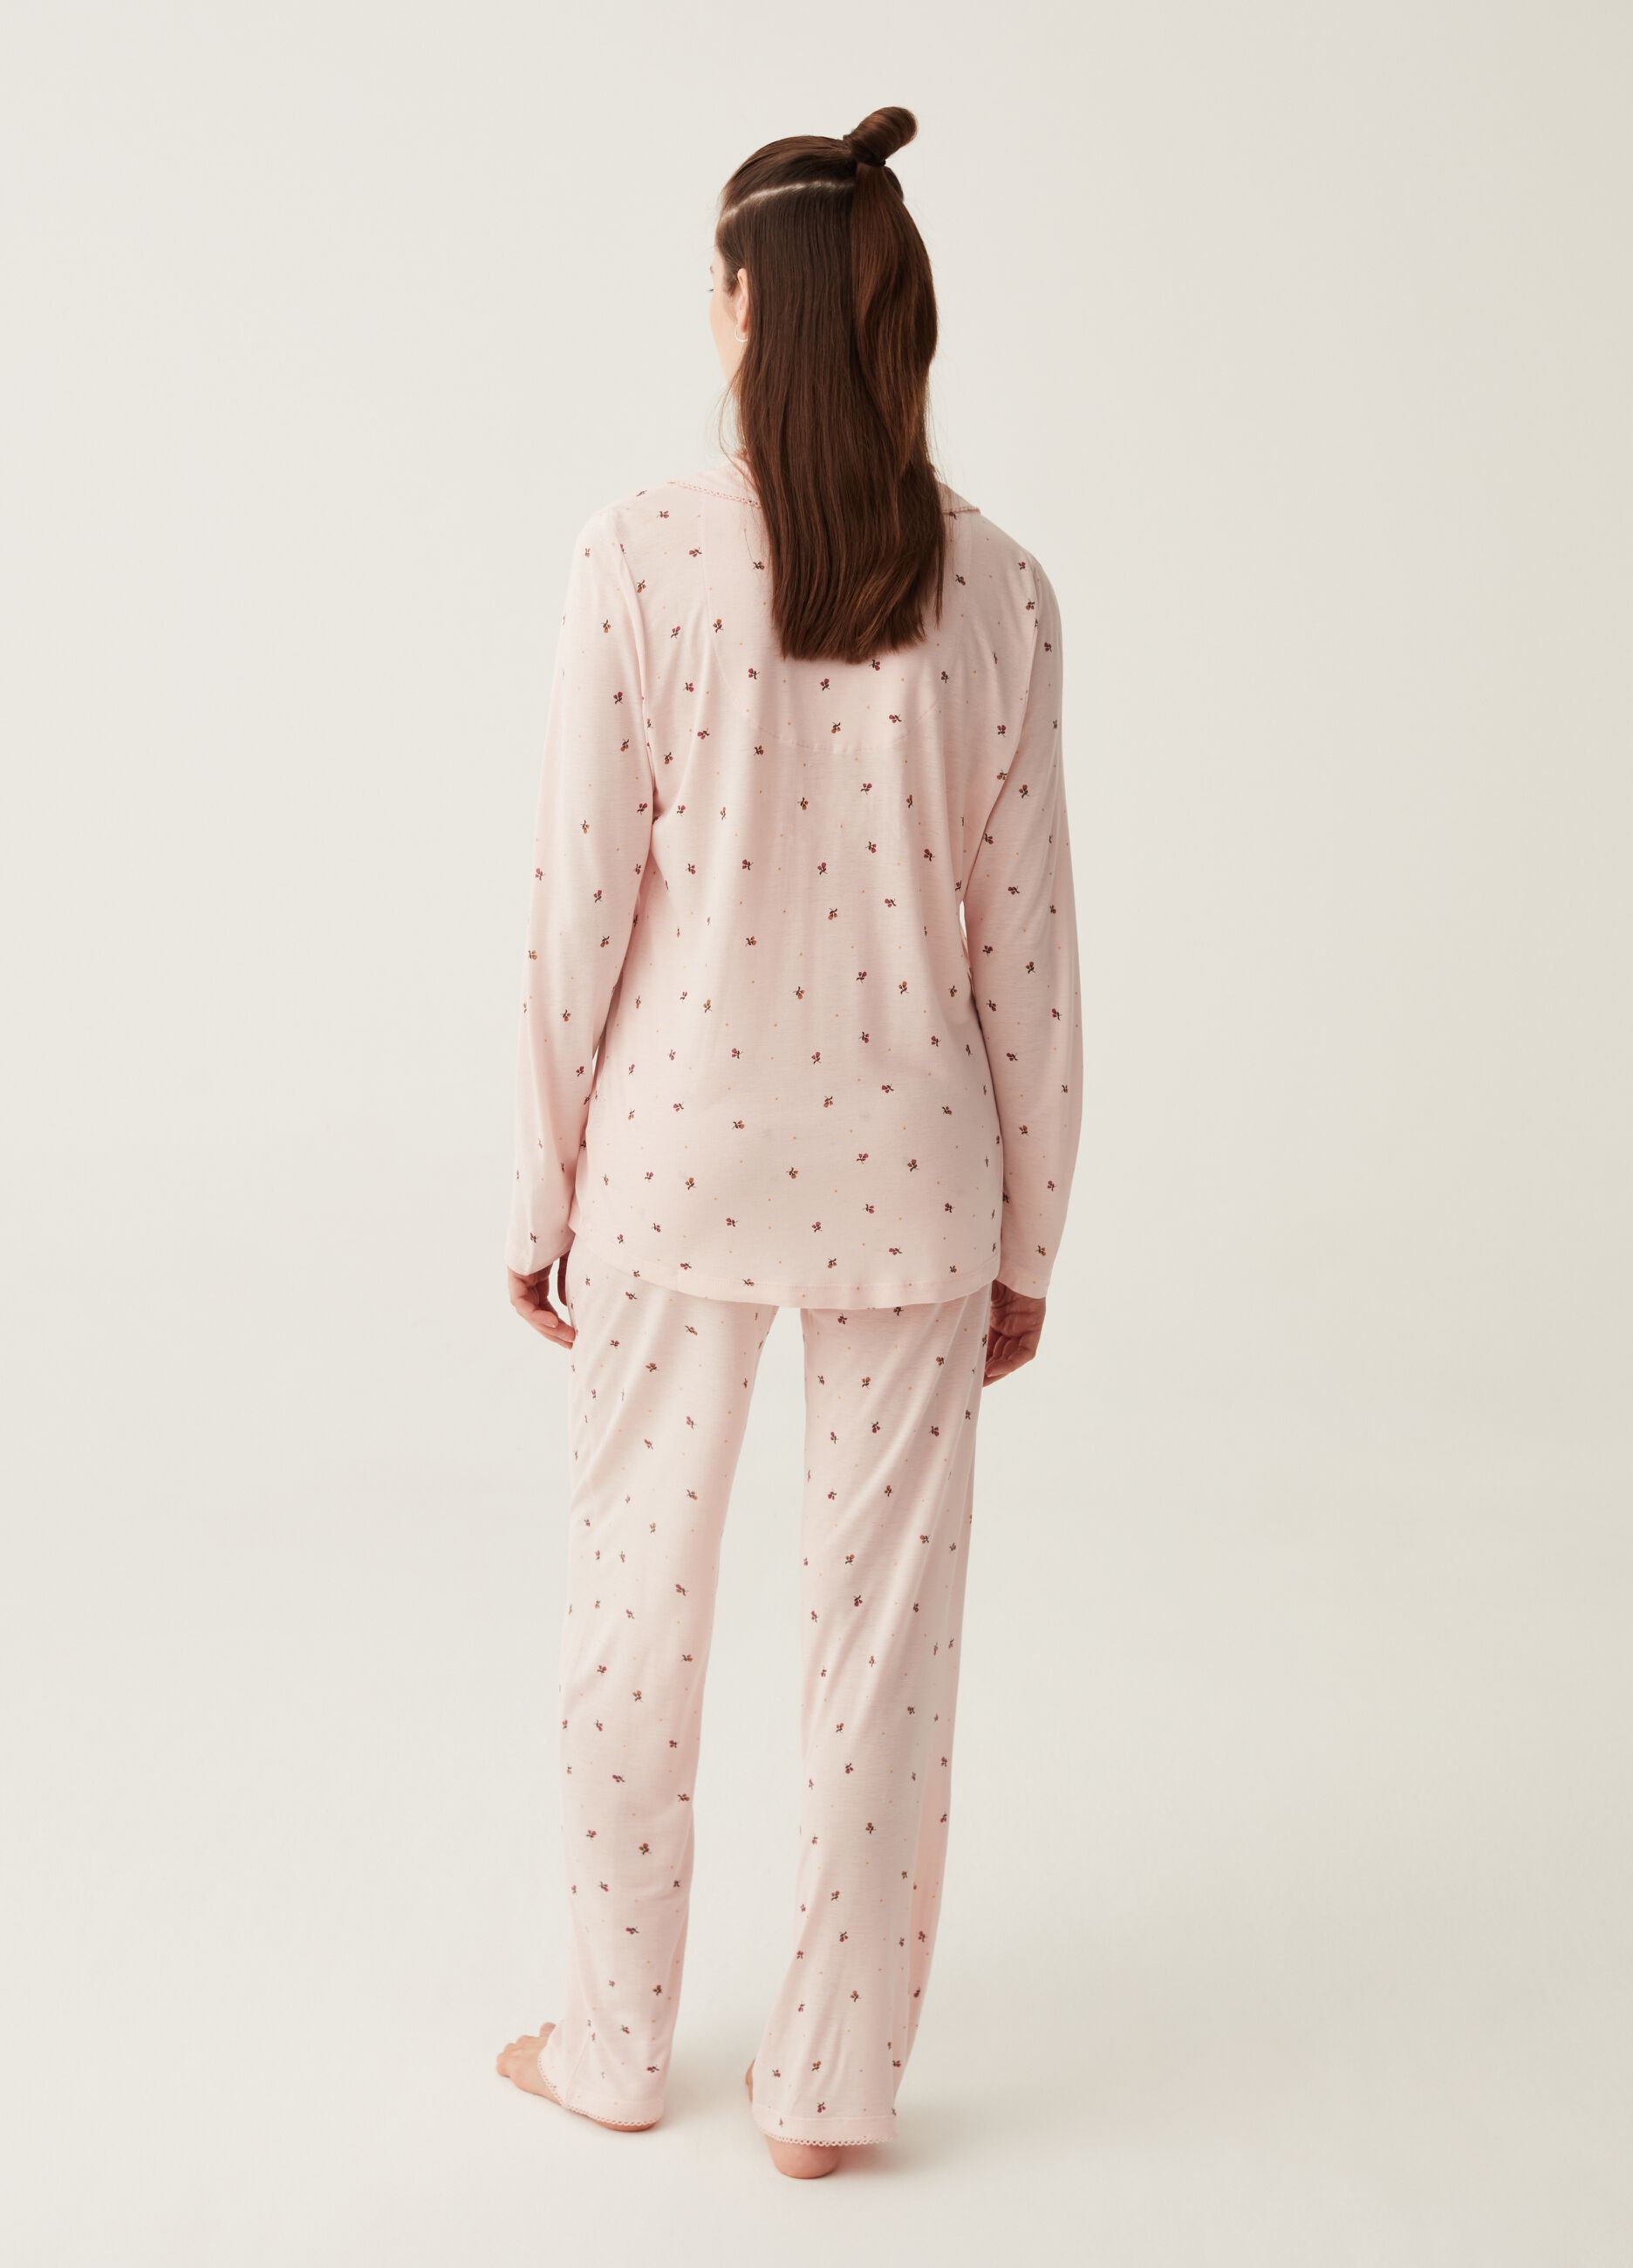 Pyjamas with polka dot and small flowers pattern_2